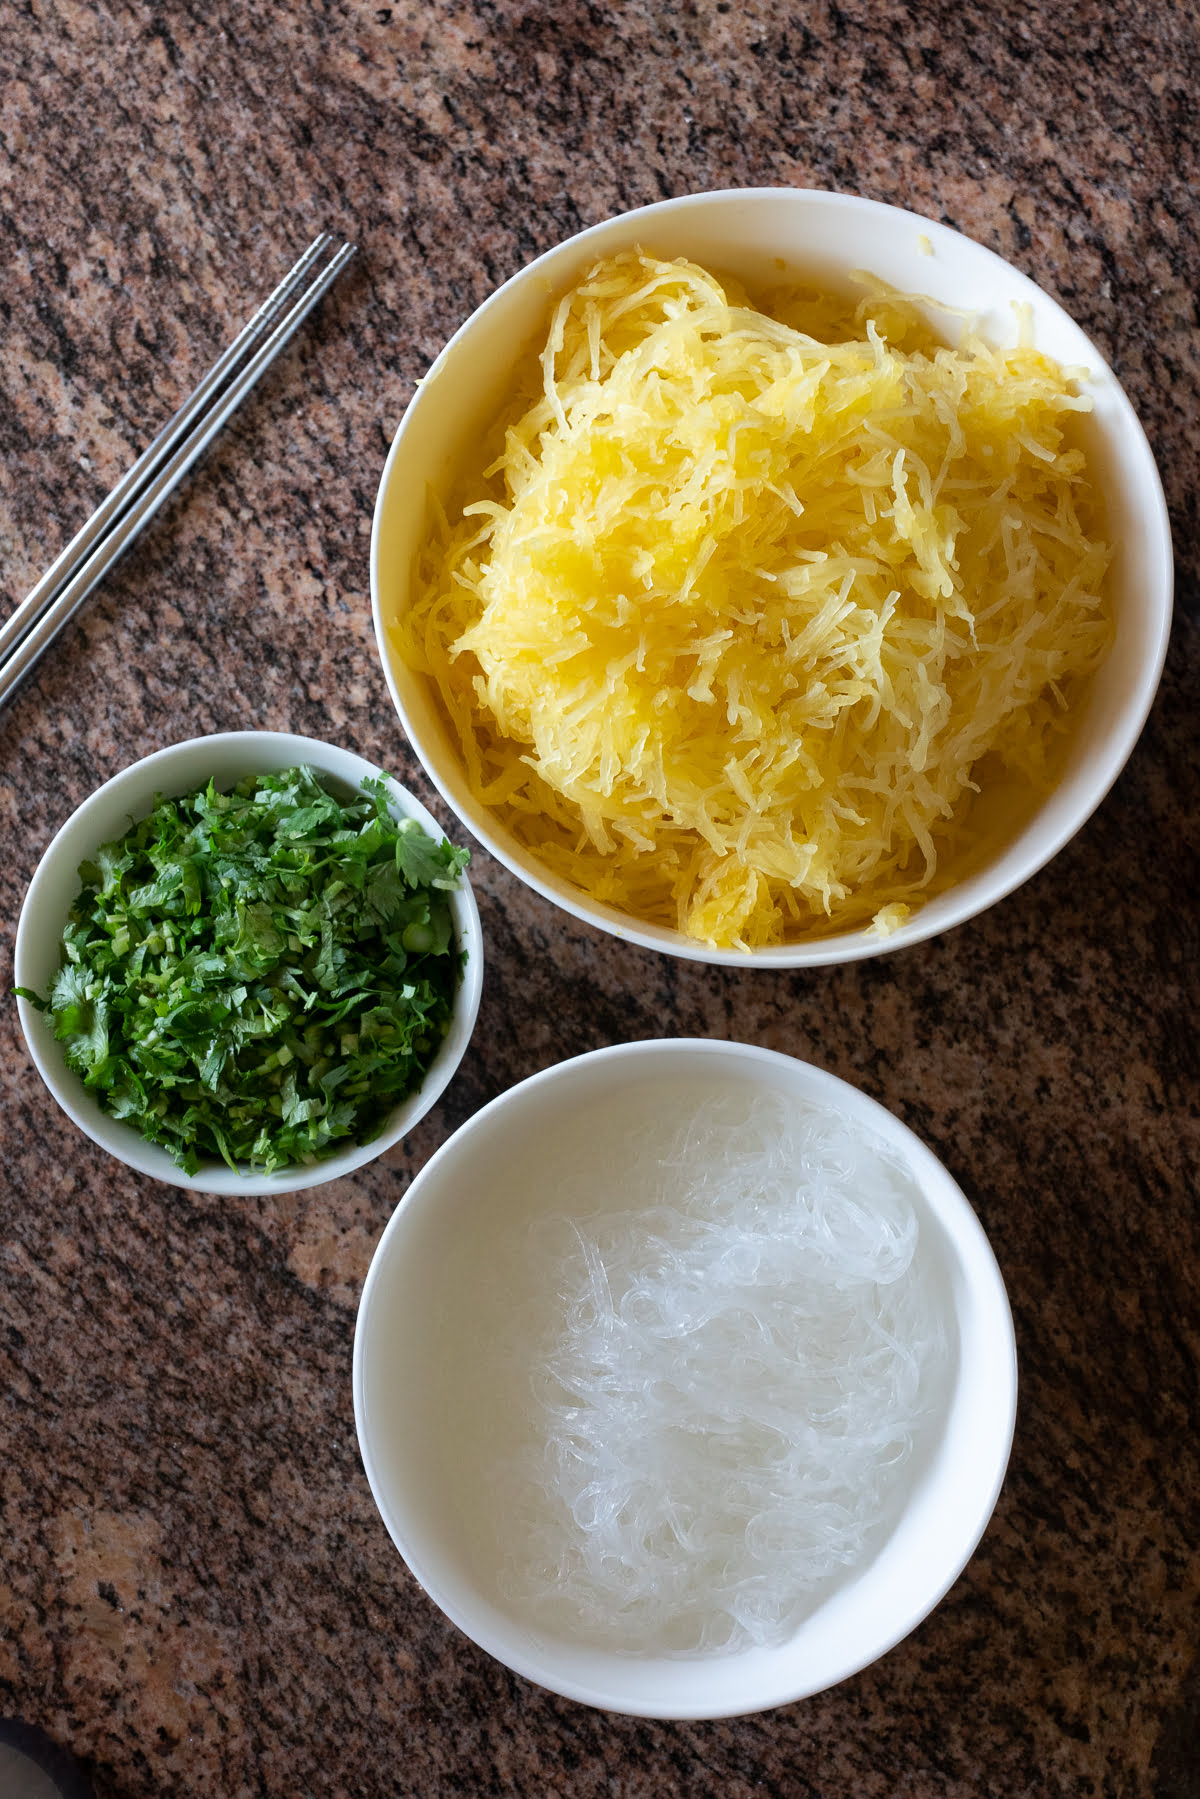 Bowls of roasted spaghetti squash, glass noodles, and cilantro.